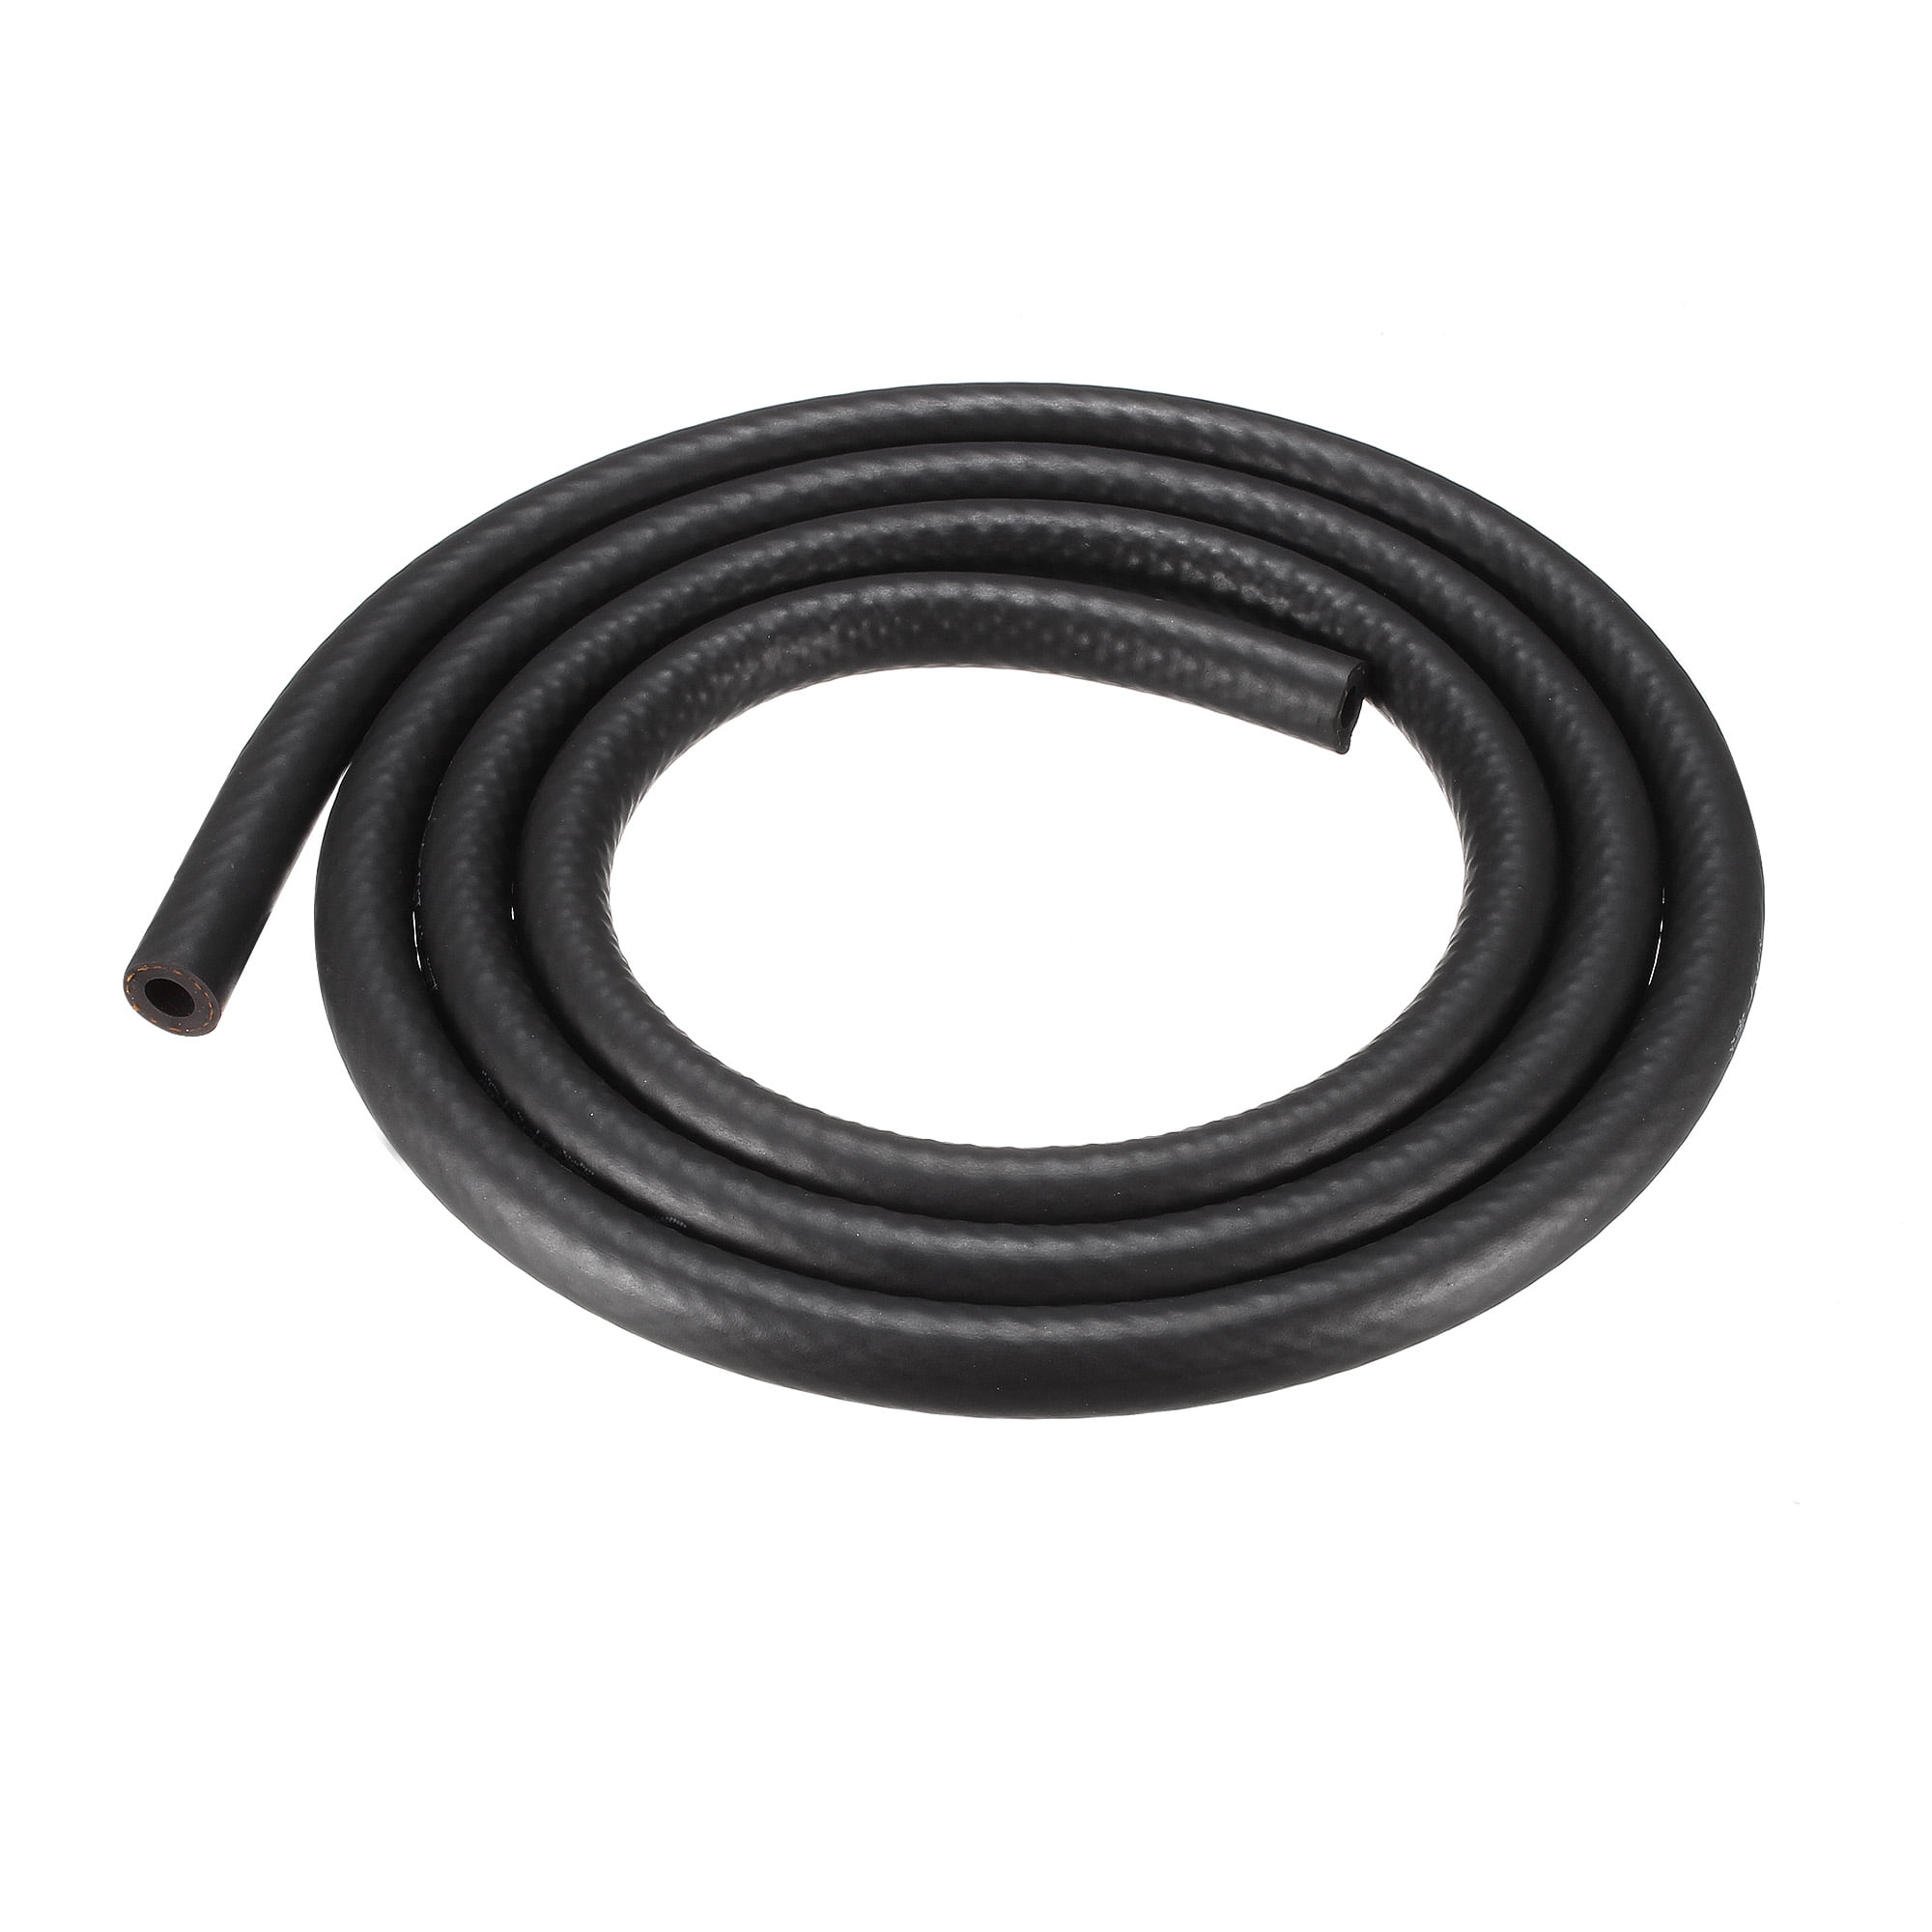 5/32 OD 10ft Rubber Water Hose Engine Pipe Tubing Black sourcing map Fuel Line Hose Oil Tube ID x 6mm 1/4 4mm 